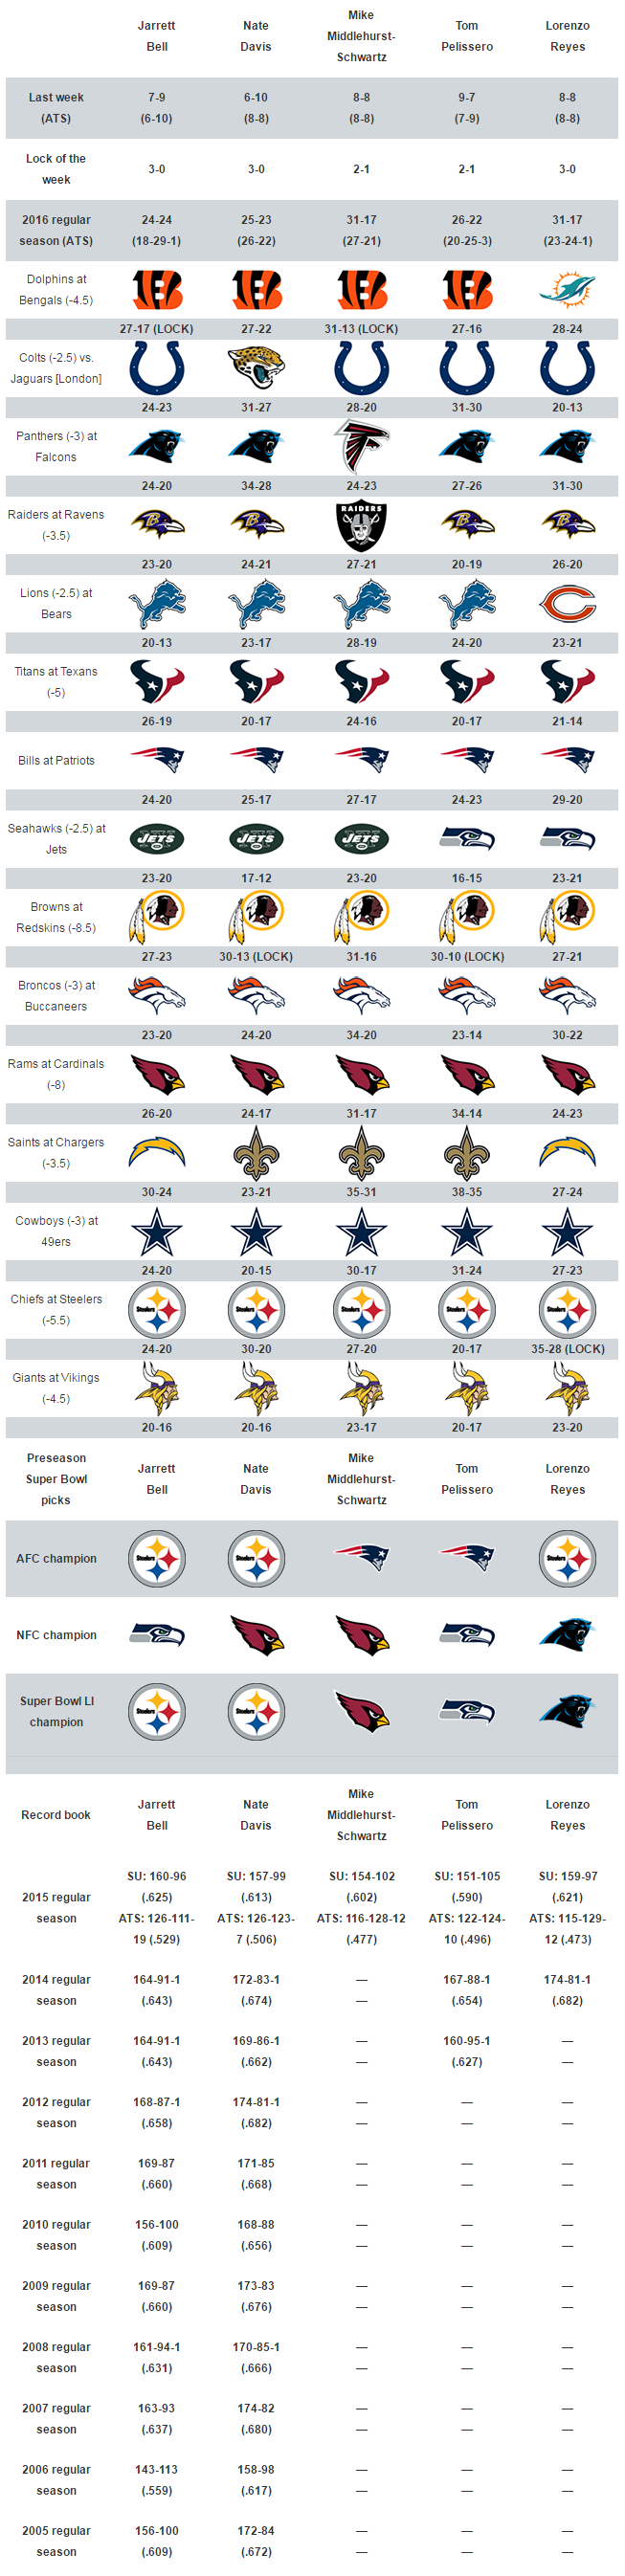 predictions for week 3 nfl games